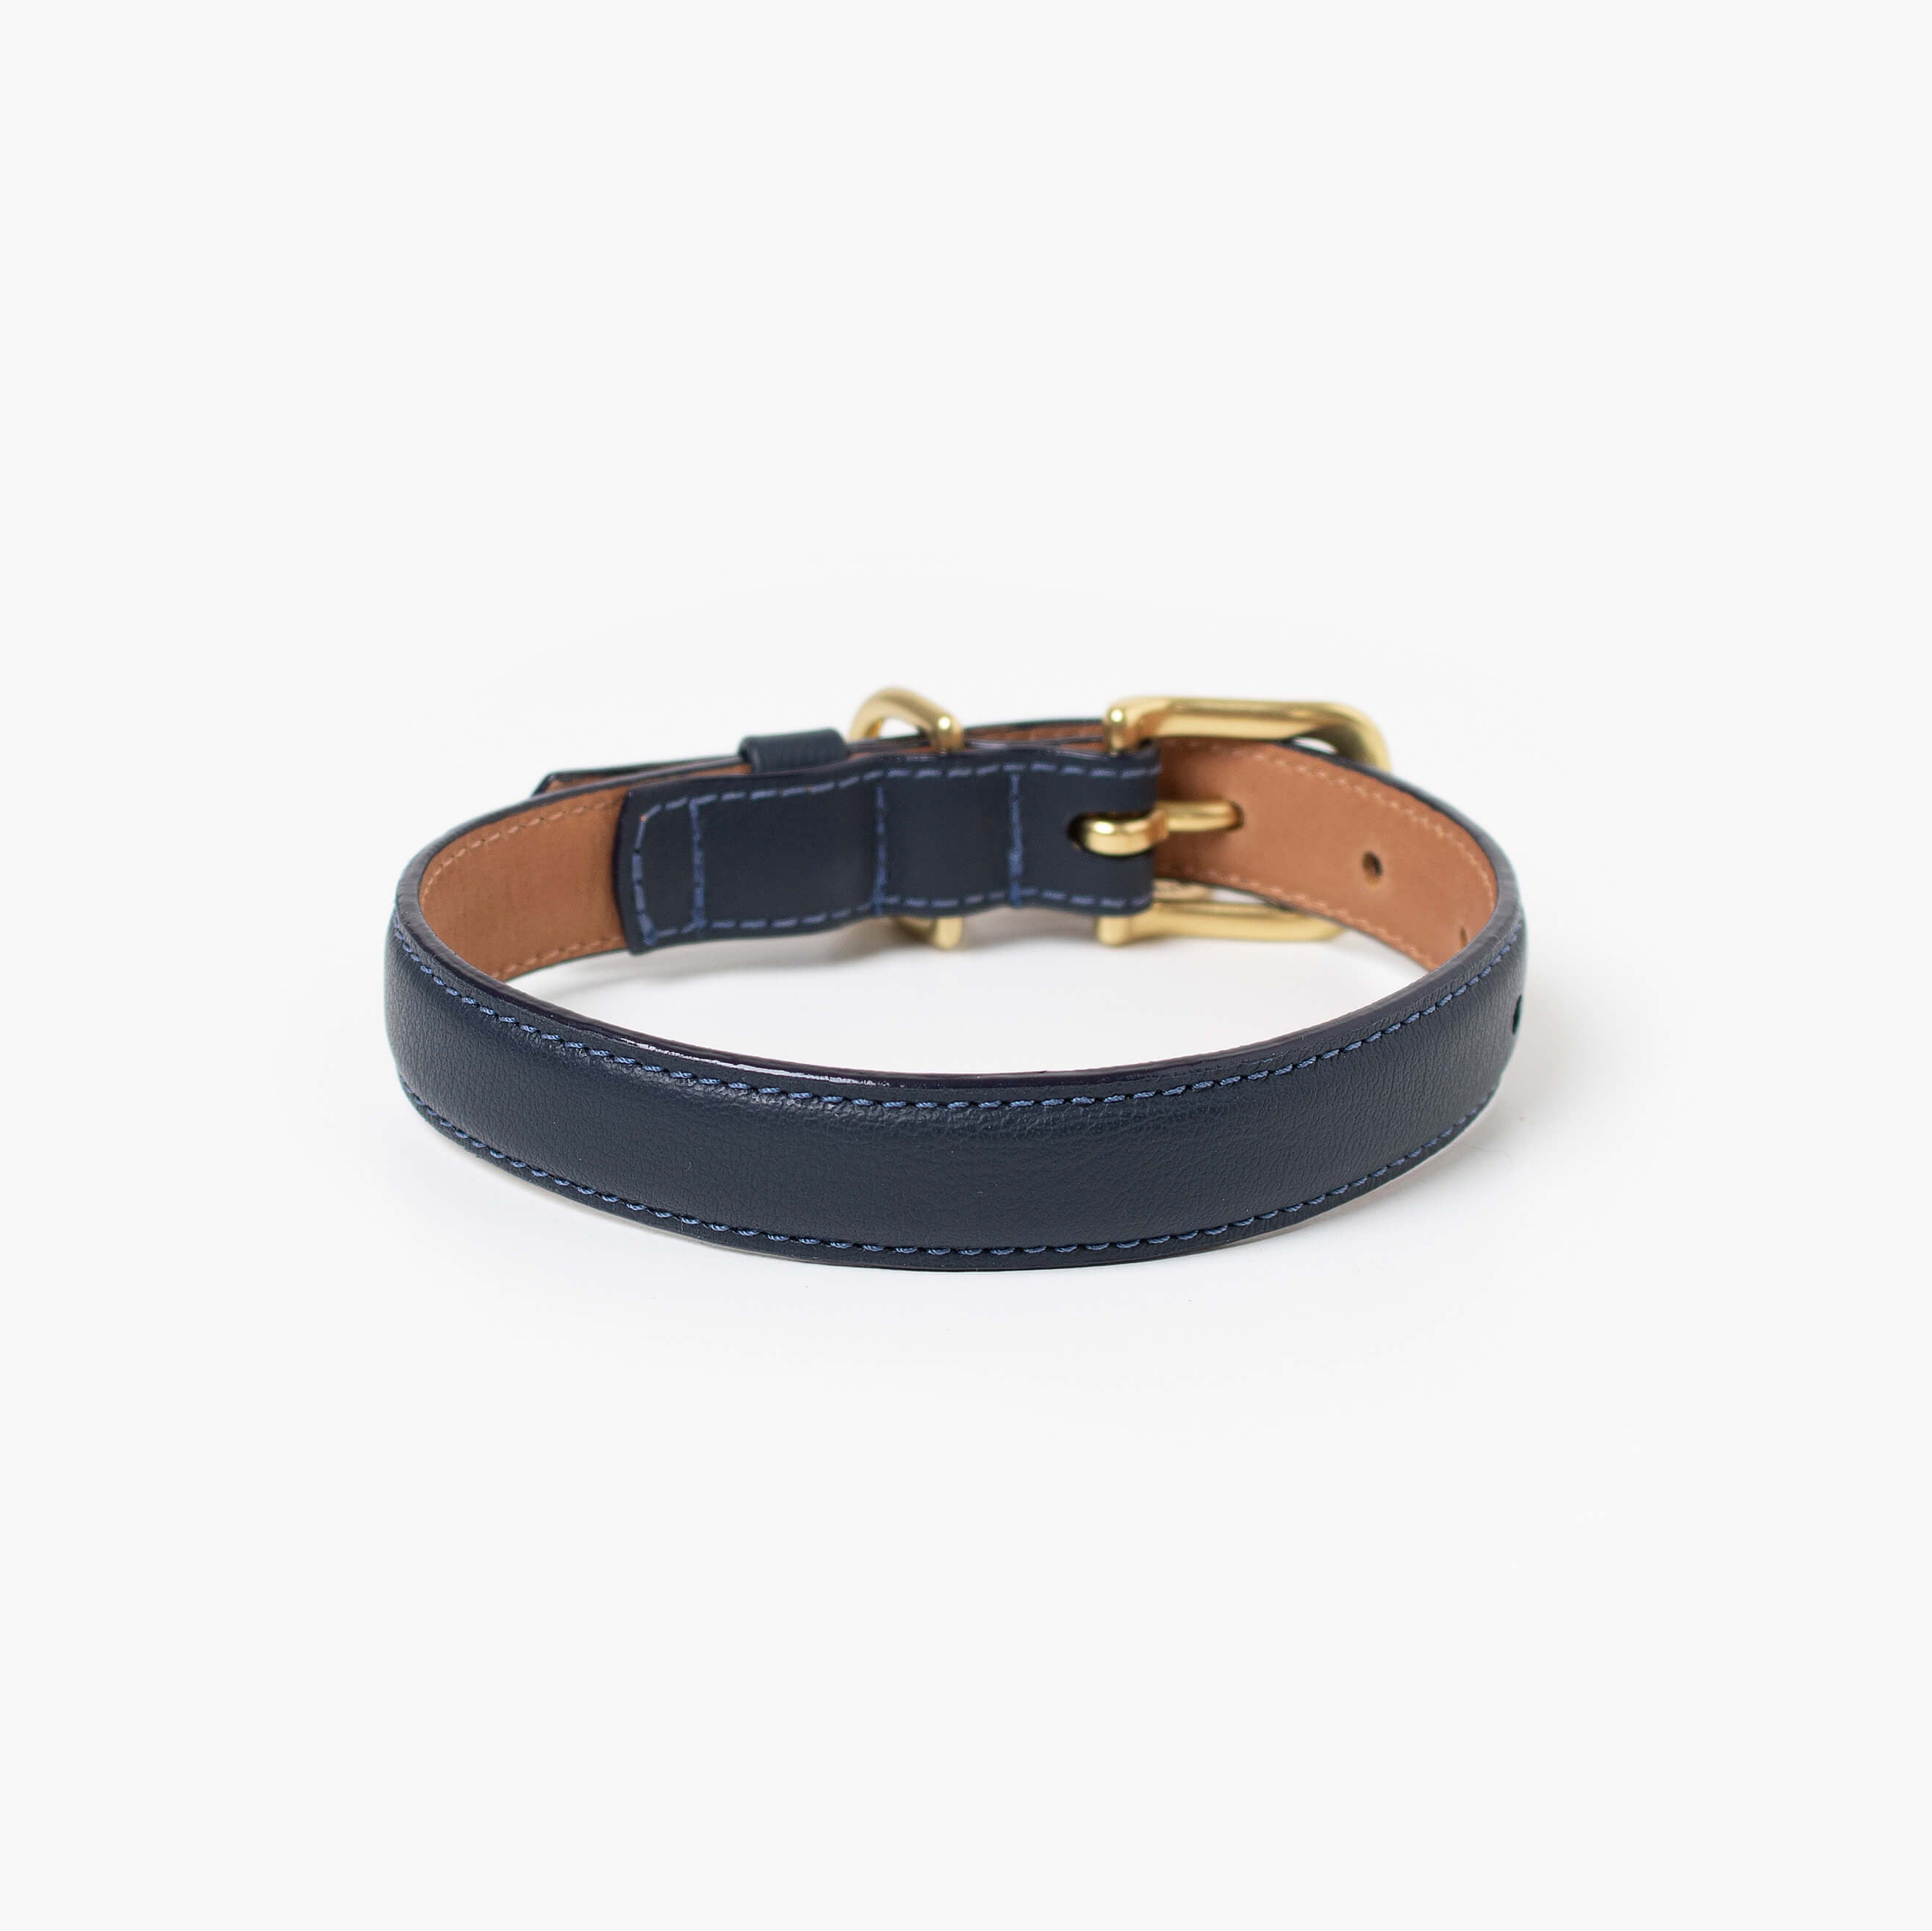 Navy blue leather dog collar with with brass hardware and tag ID. Luxury dog collar.